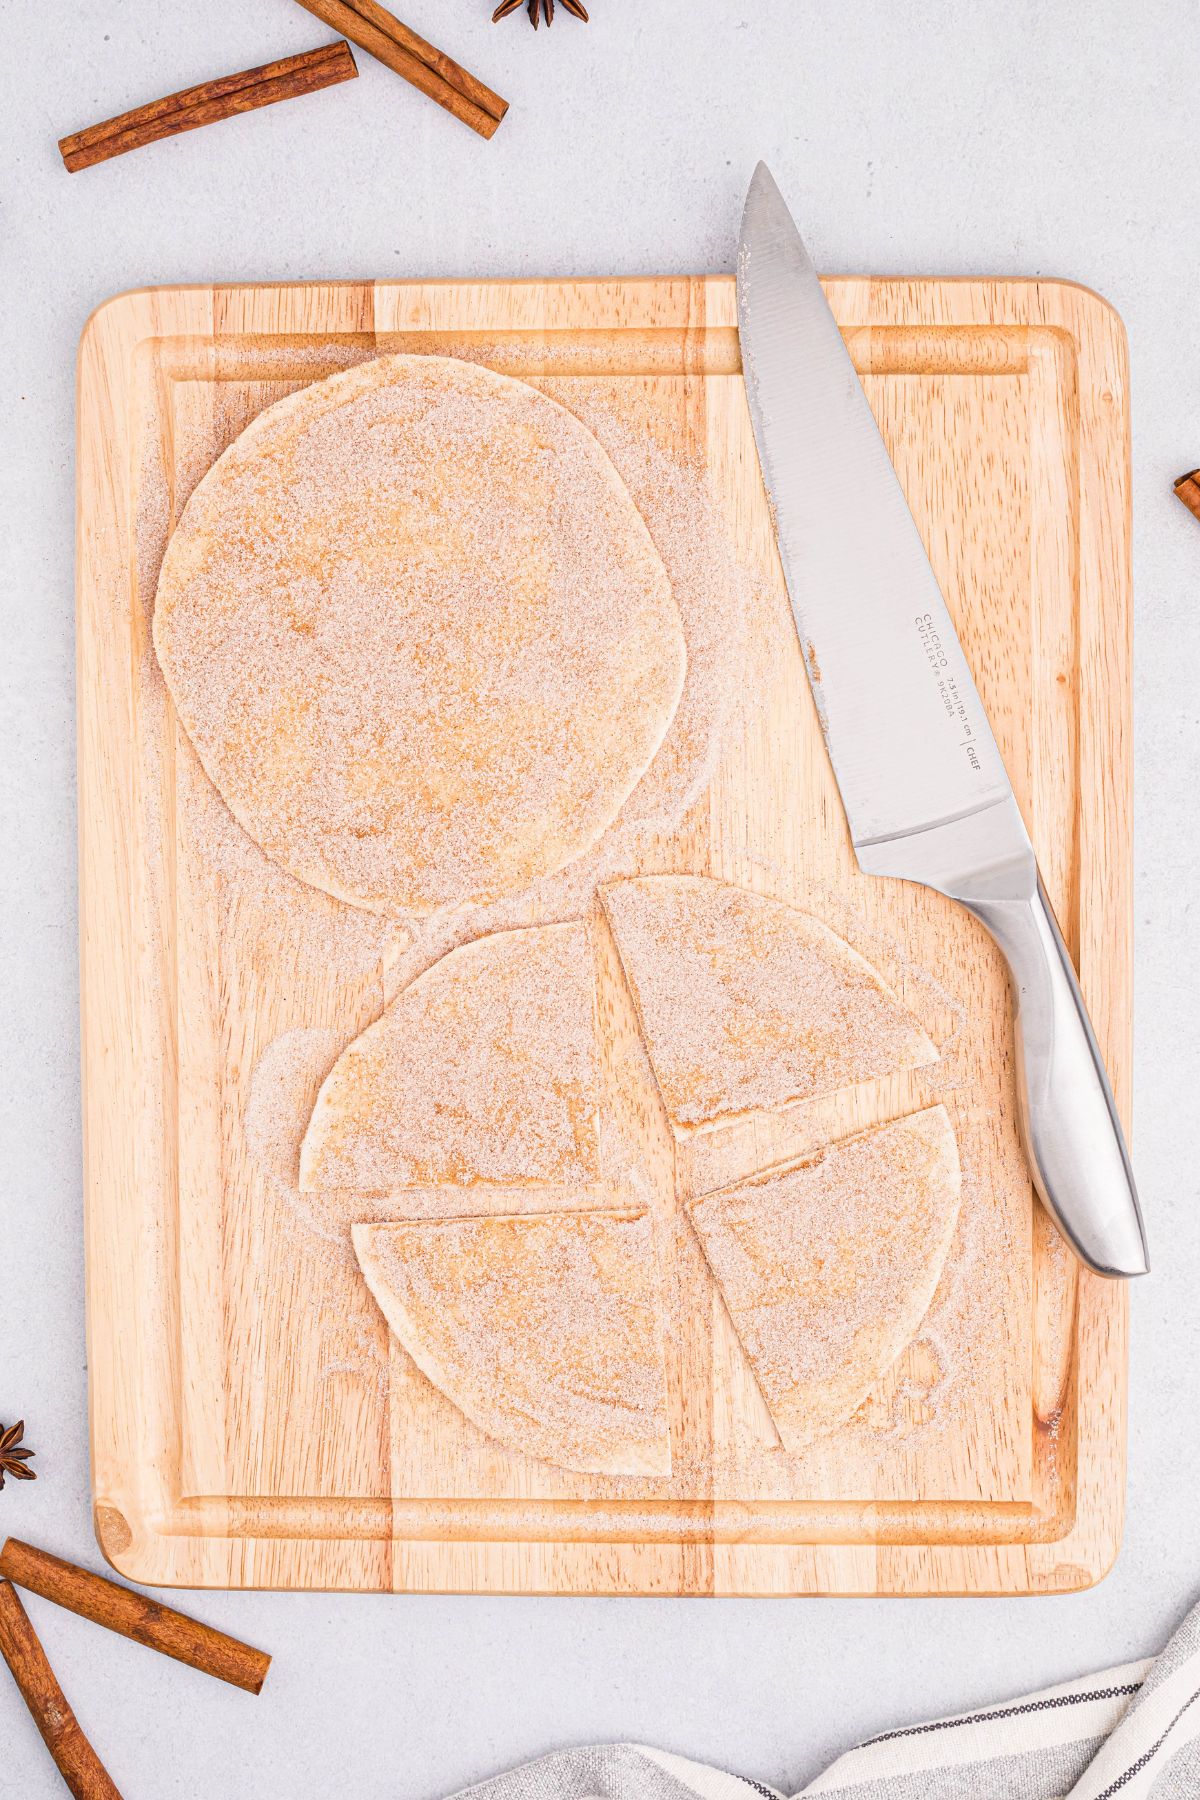 Sugar and cinnamon coating flour tortillas and then cut into triangles on a cutting board